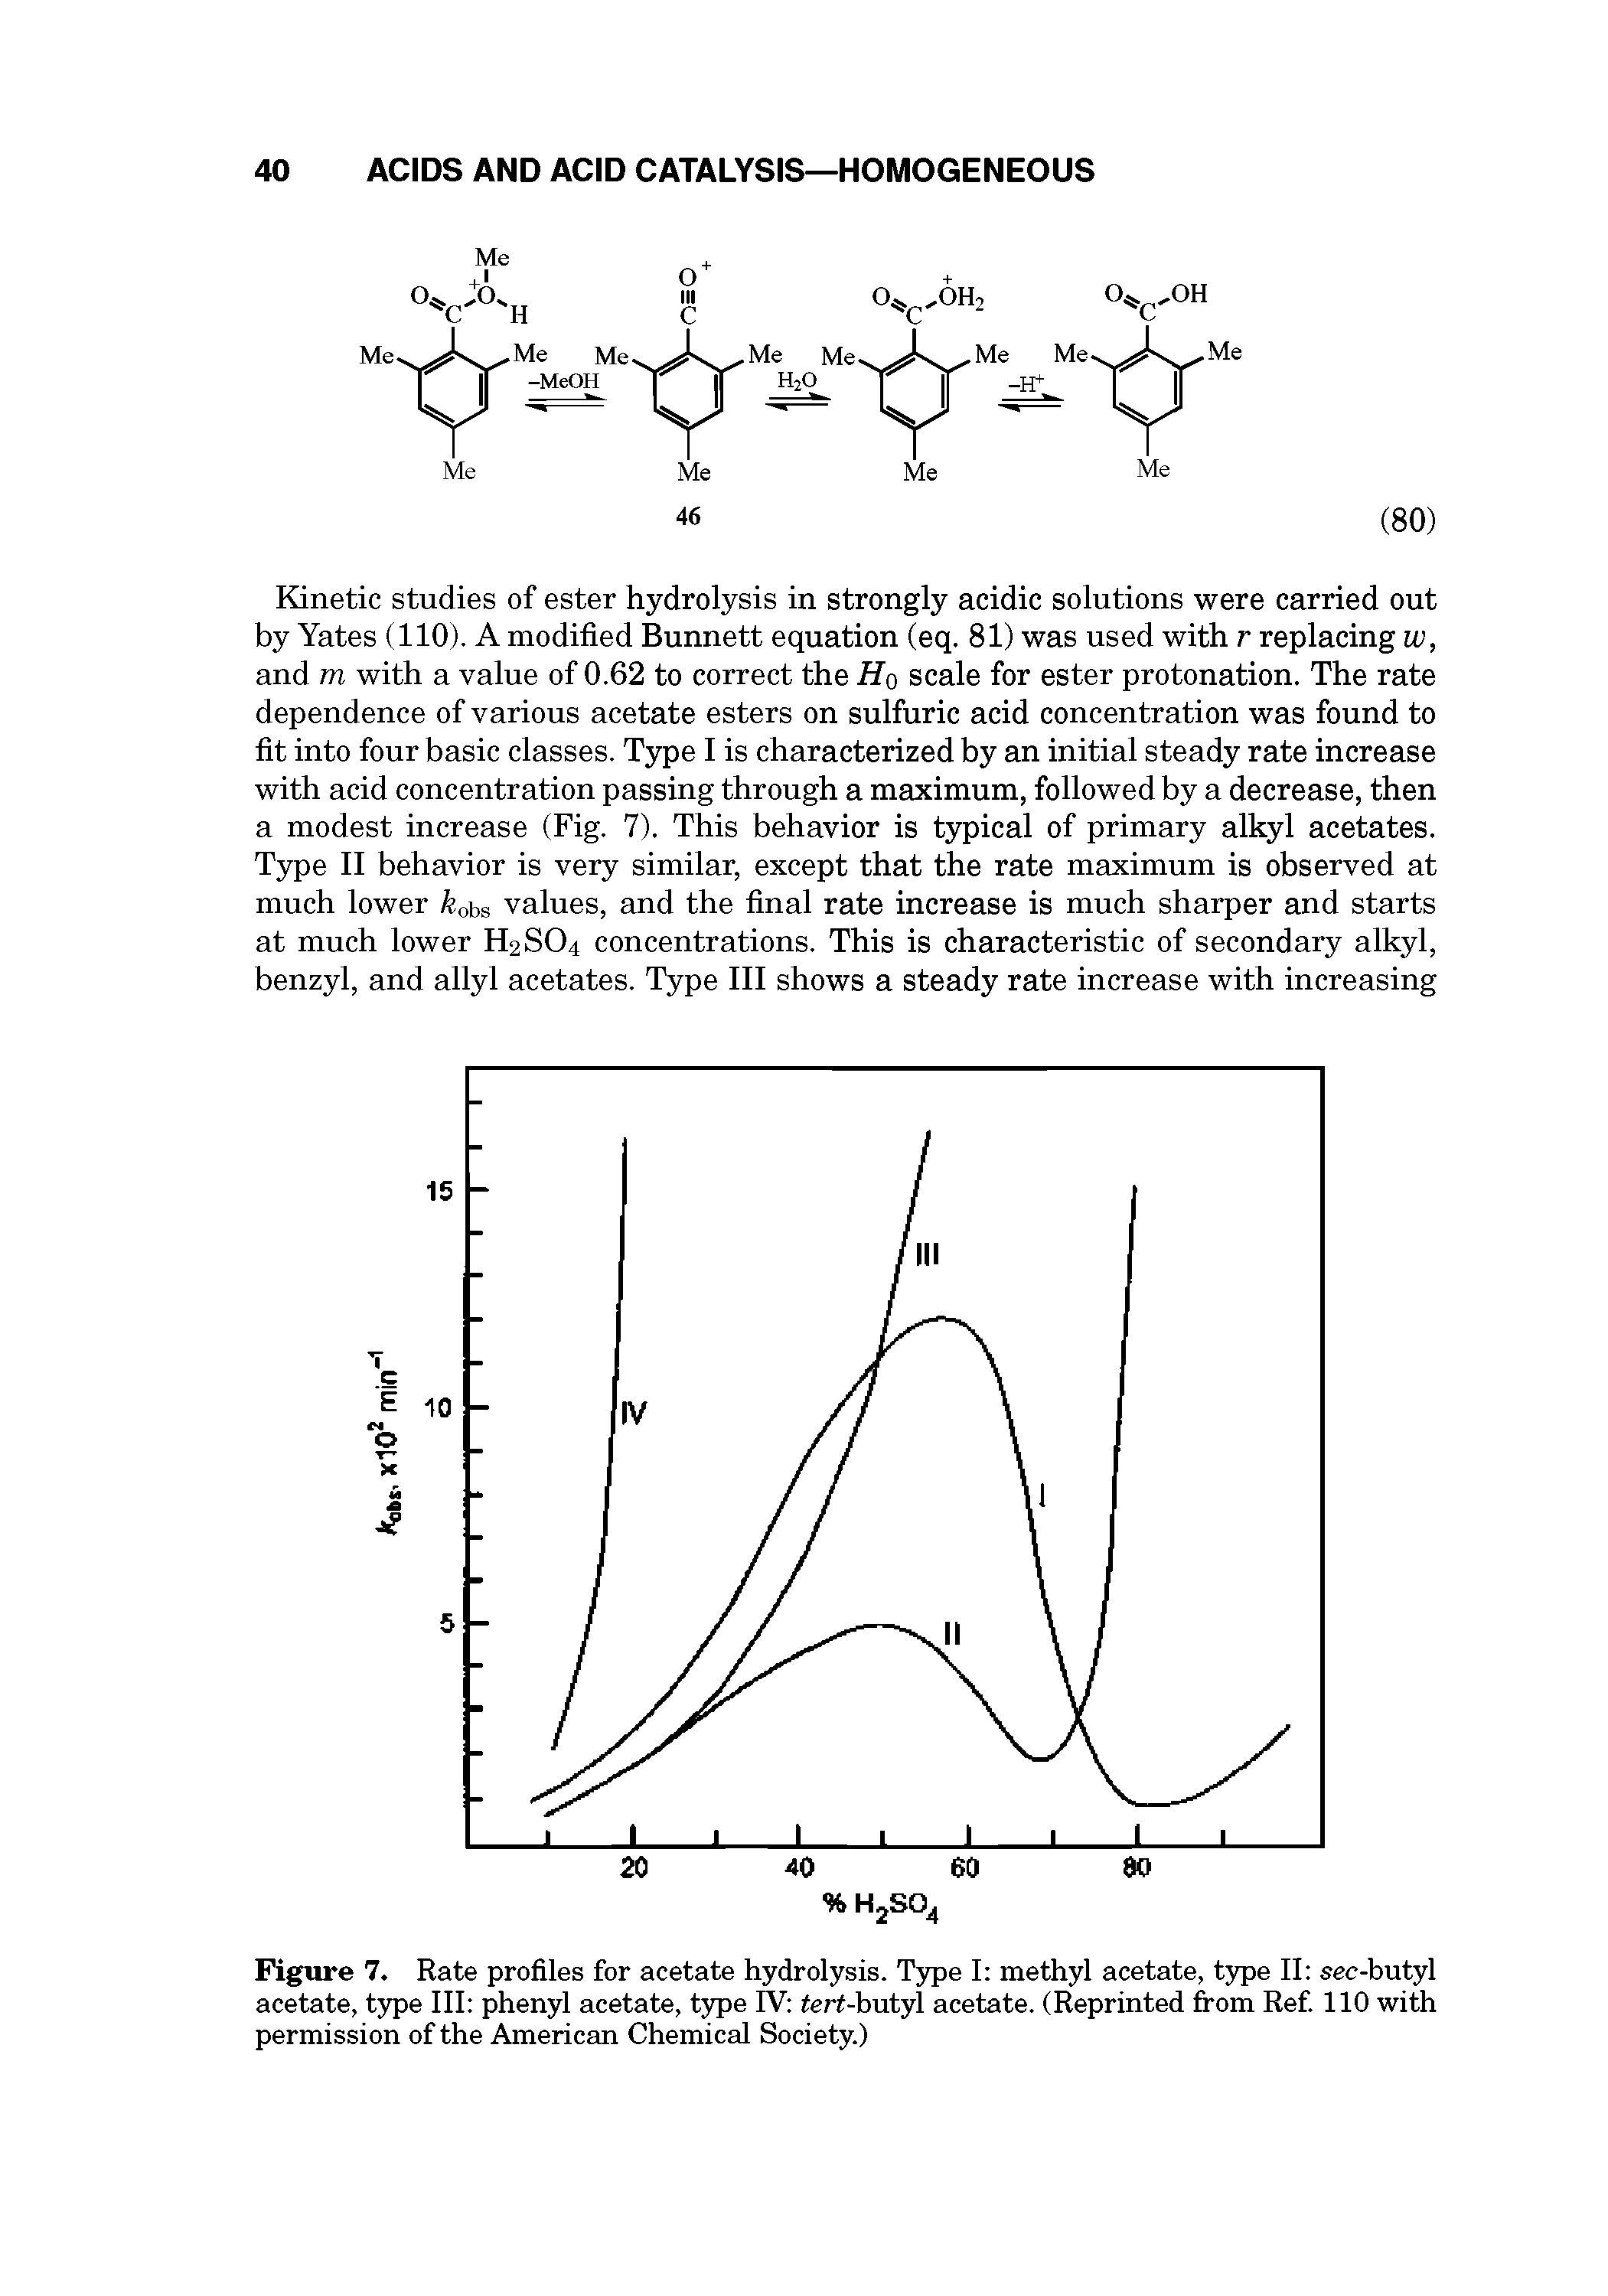 Figure 7. Rate profiles for acetate hydrolysis. Type I methyl acetate, type II sec-butyl acetate, t5rpe III phenyl acetate, t3rpe IV tert-butyl acetate. (Reprinted from Ref. 110 with permission of the American Chemical Society.)...